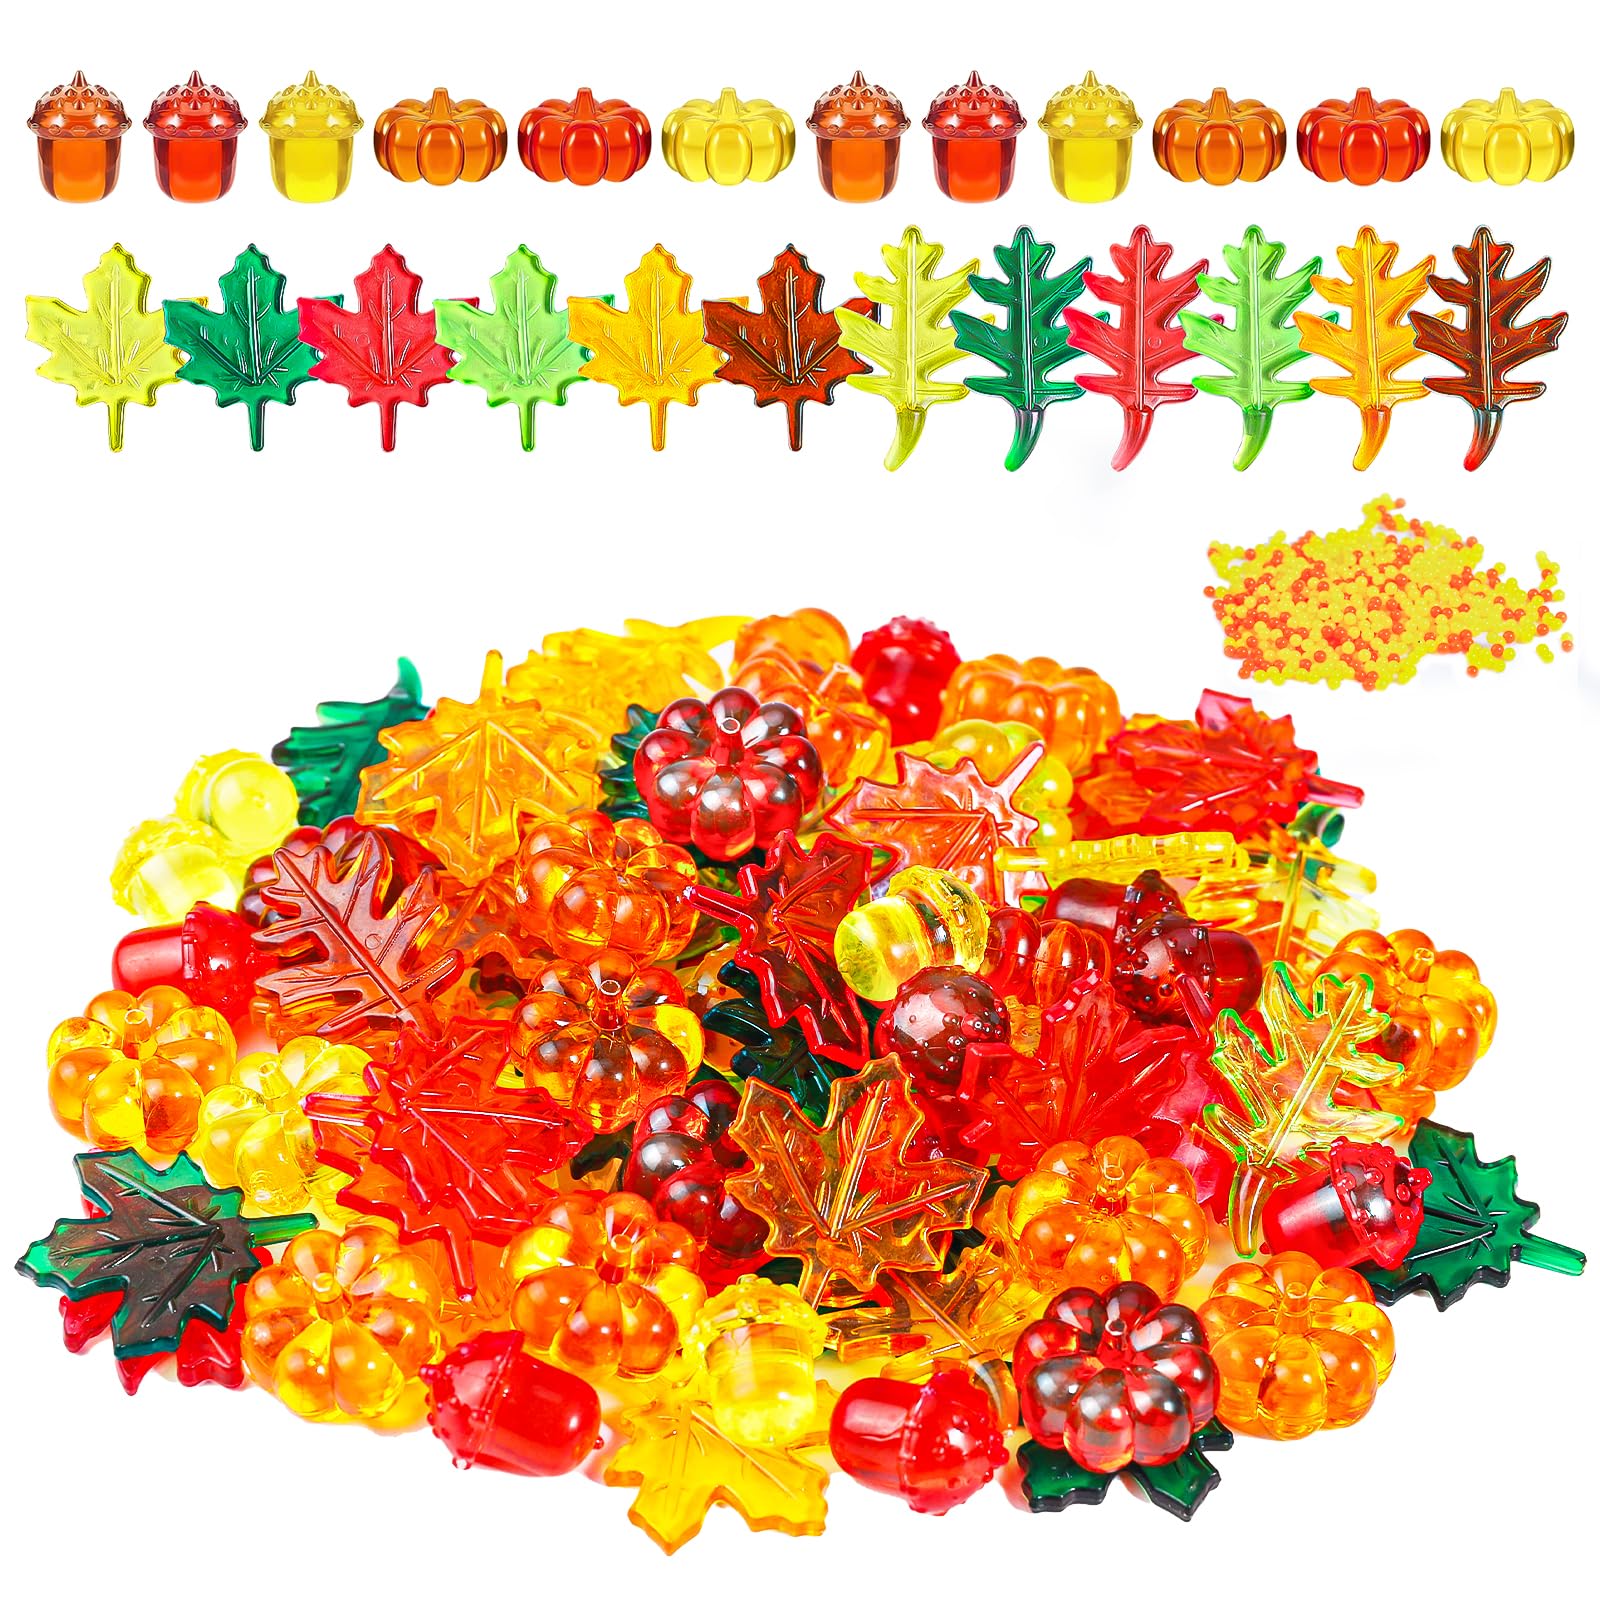 Japior Fall Vase Filler Decorations 90Pcs Acrylic Fall Leaves Pumpkin Marbles Pine Cones 510Pcs Water Beads Decor Centerpiece Table Decorations for Thanksgiving Halloween Autumn